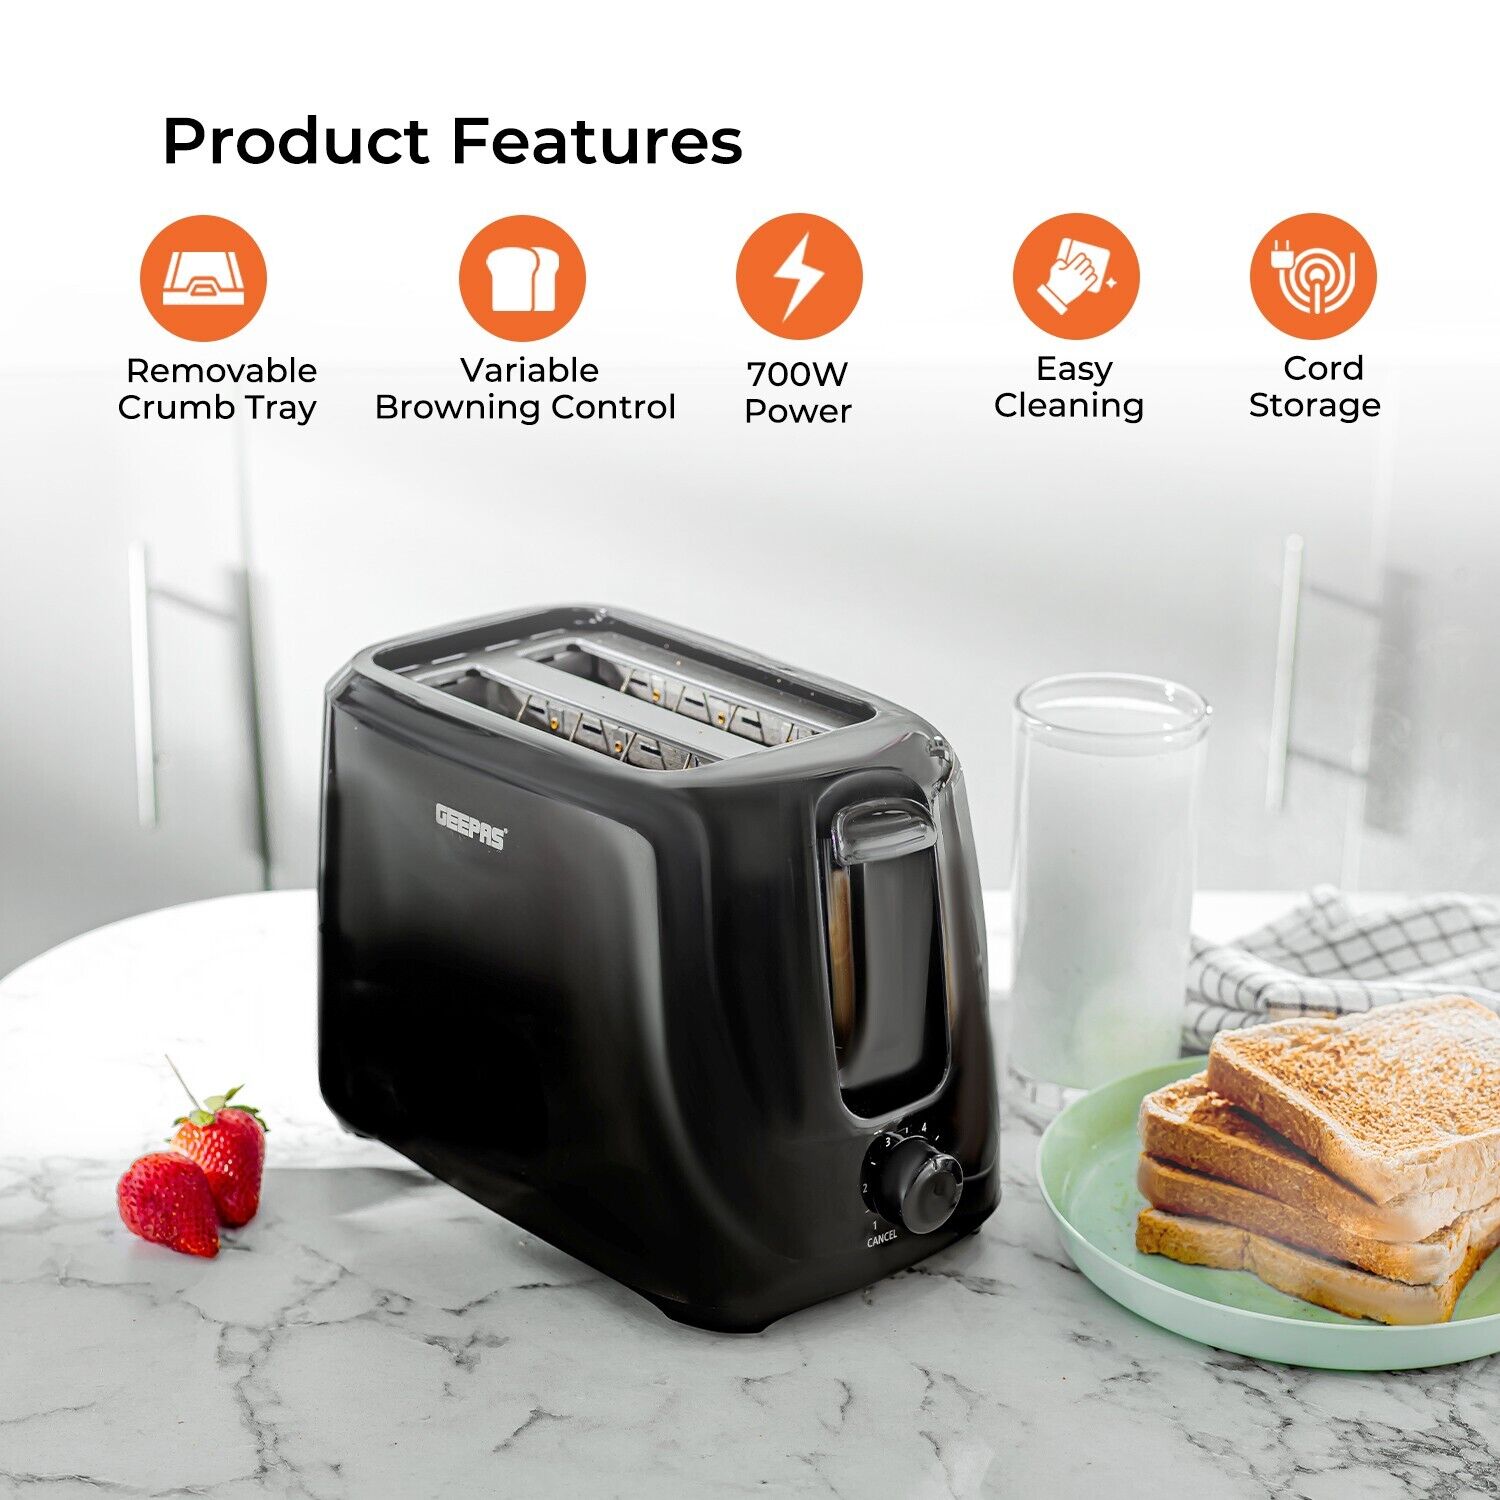 Black 2-Slice Toaster With Adjustable Browning Control